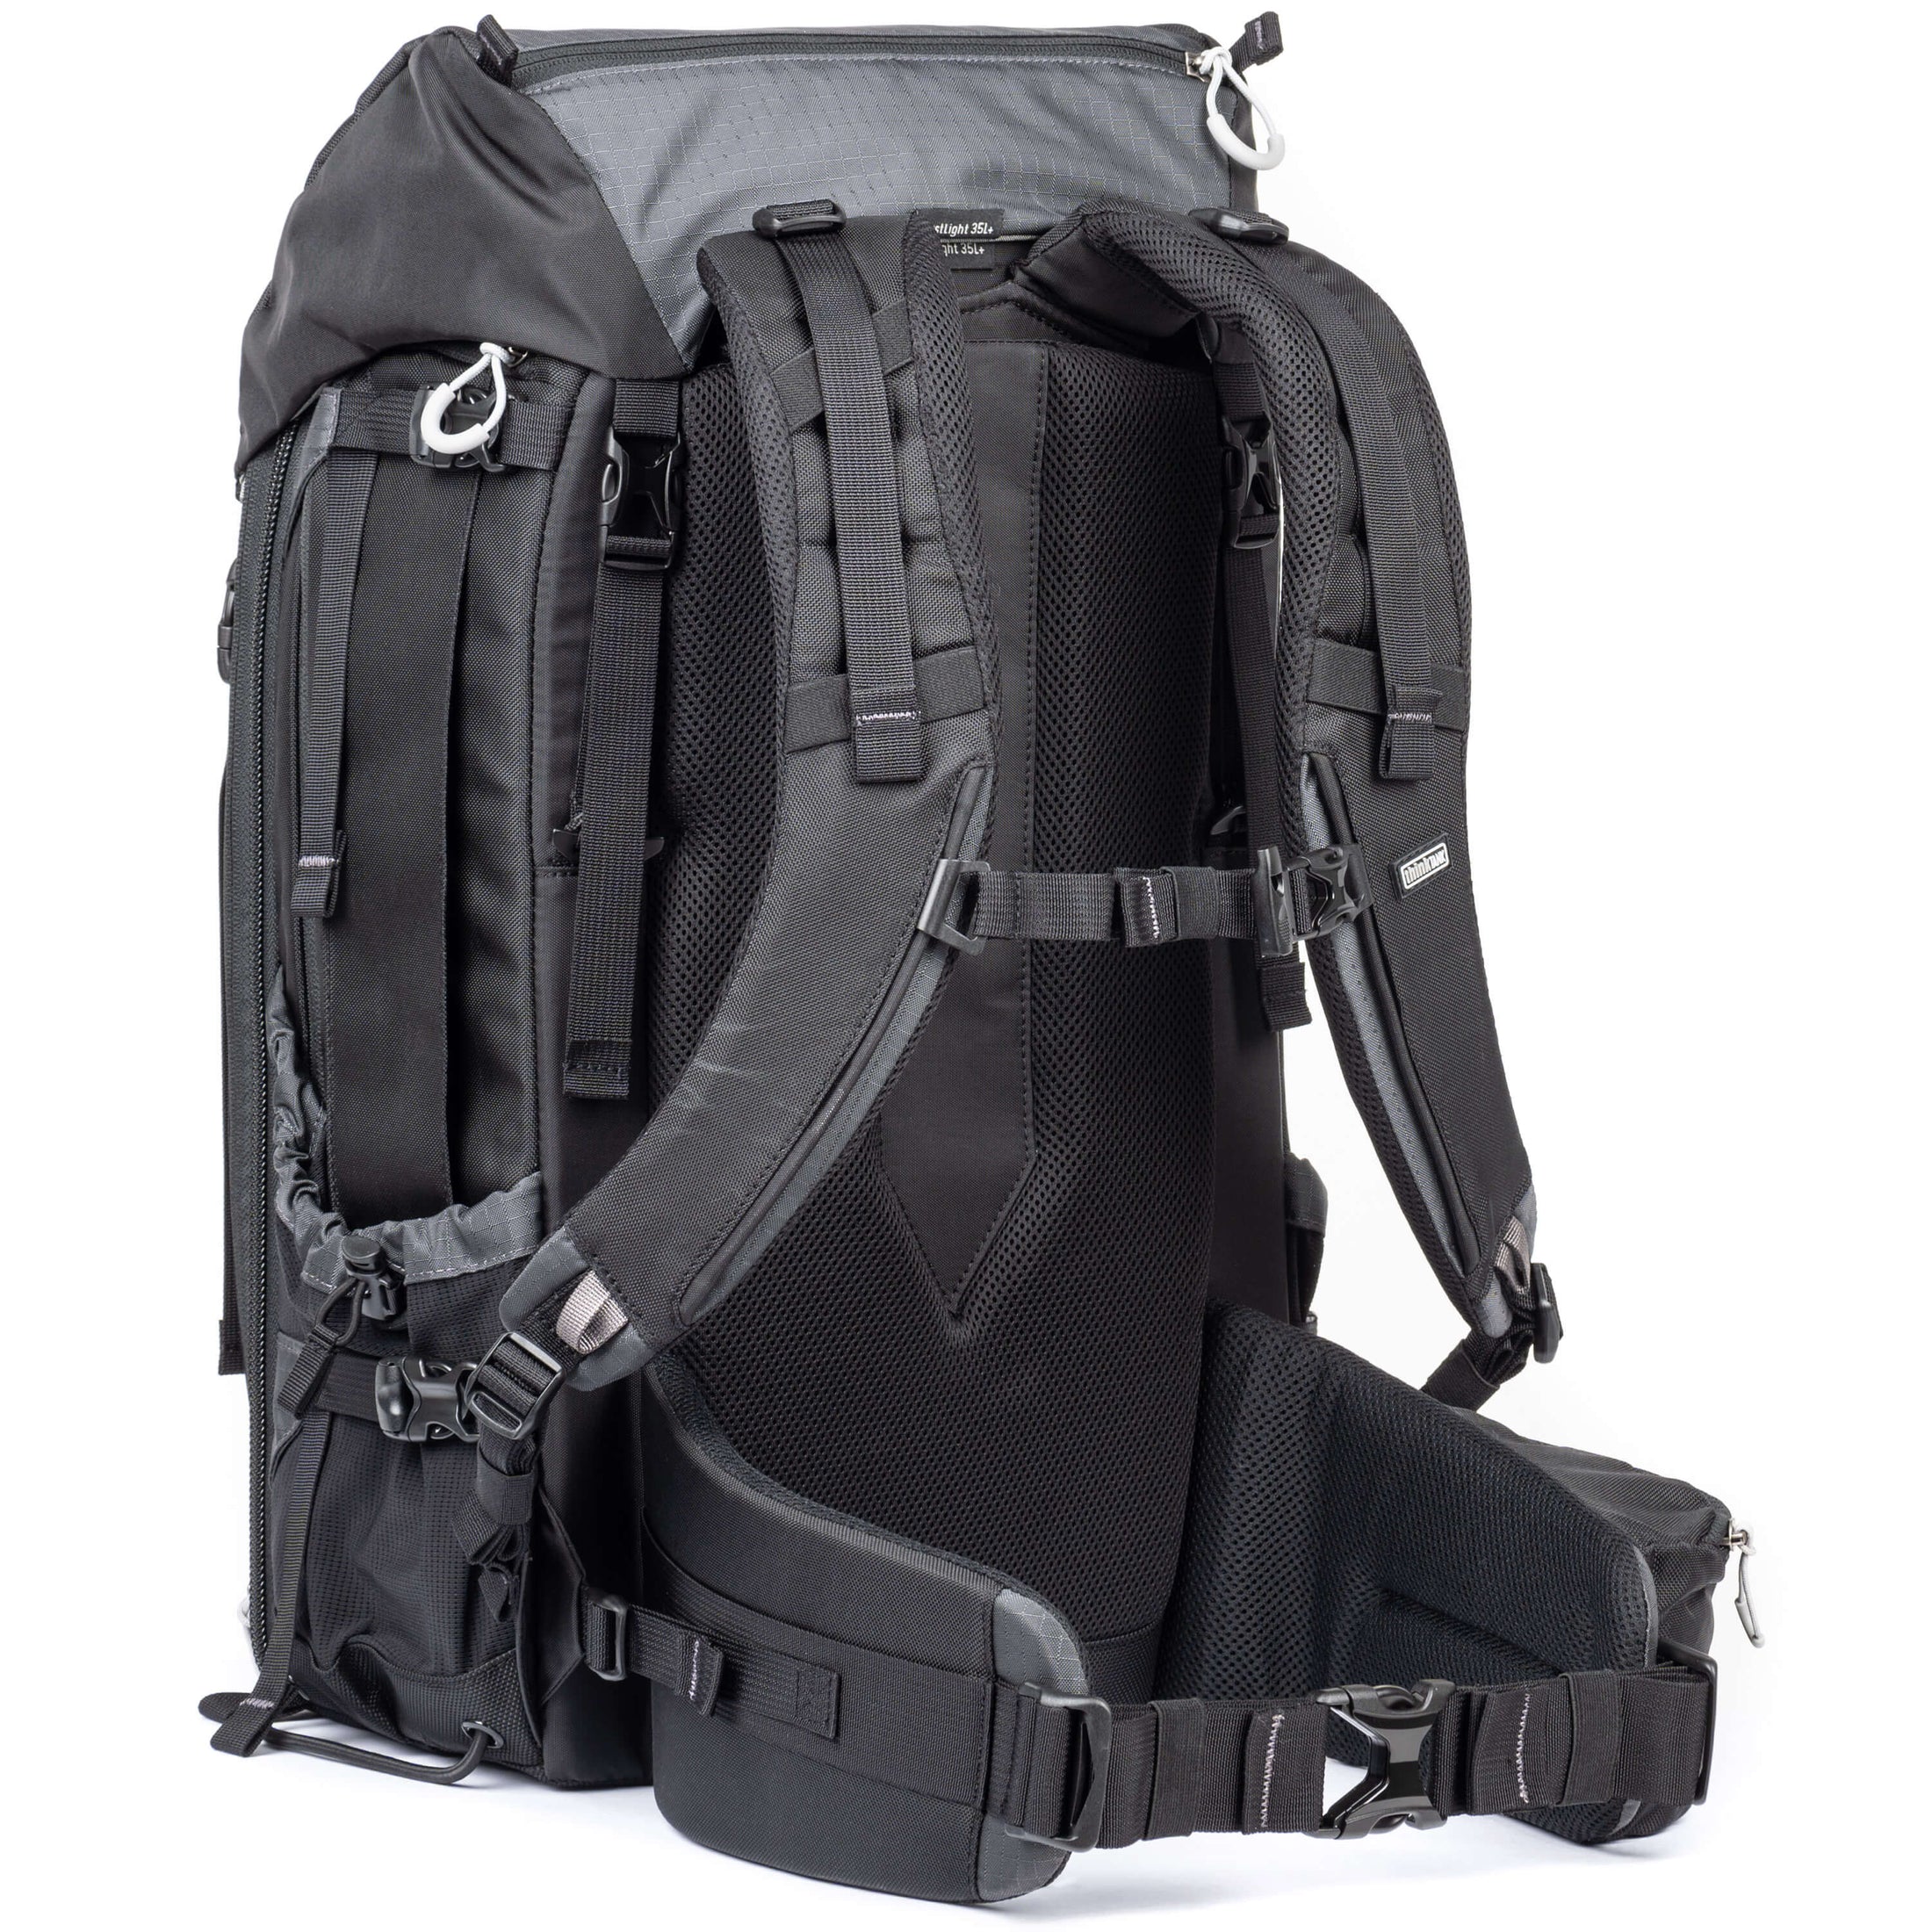 FirstLight® 35L+ Camera Backpack for Adventure Travel – Think Tank Photo